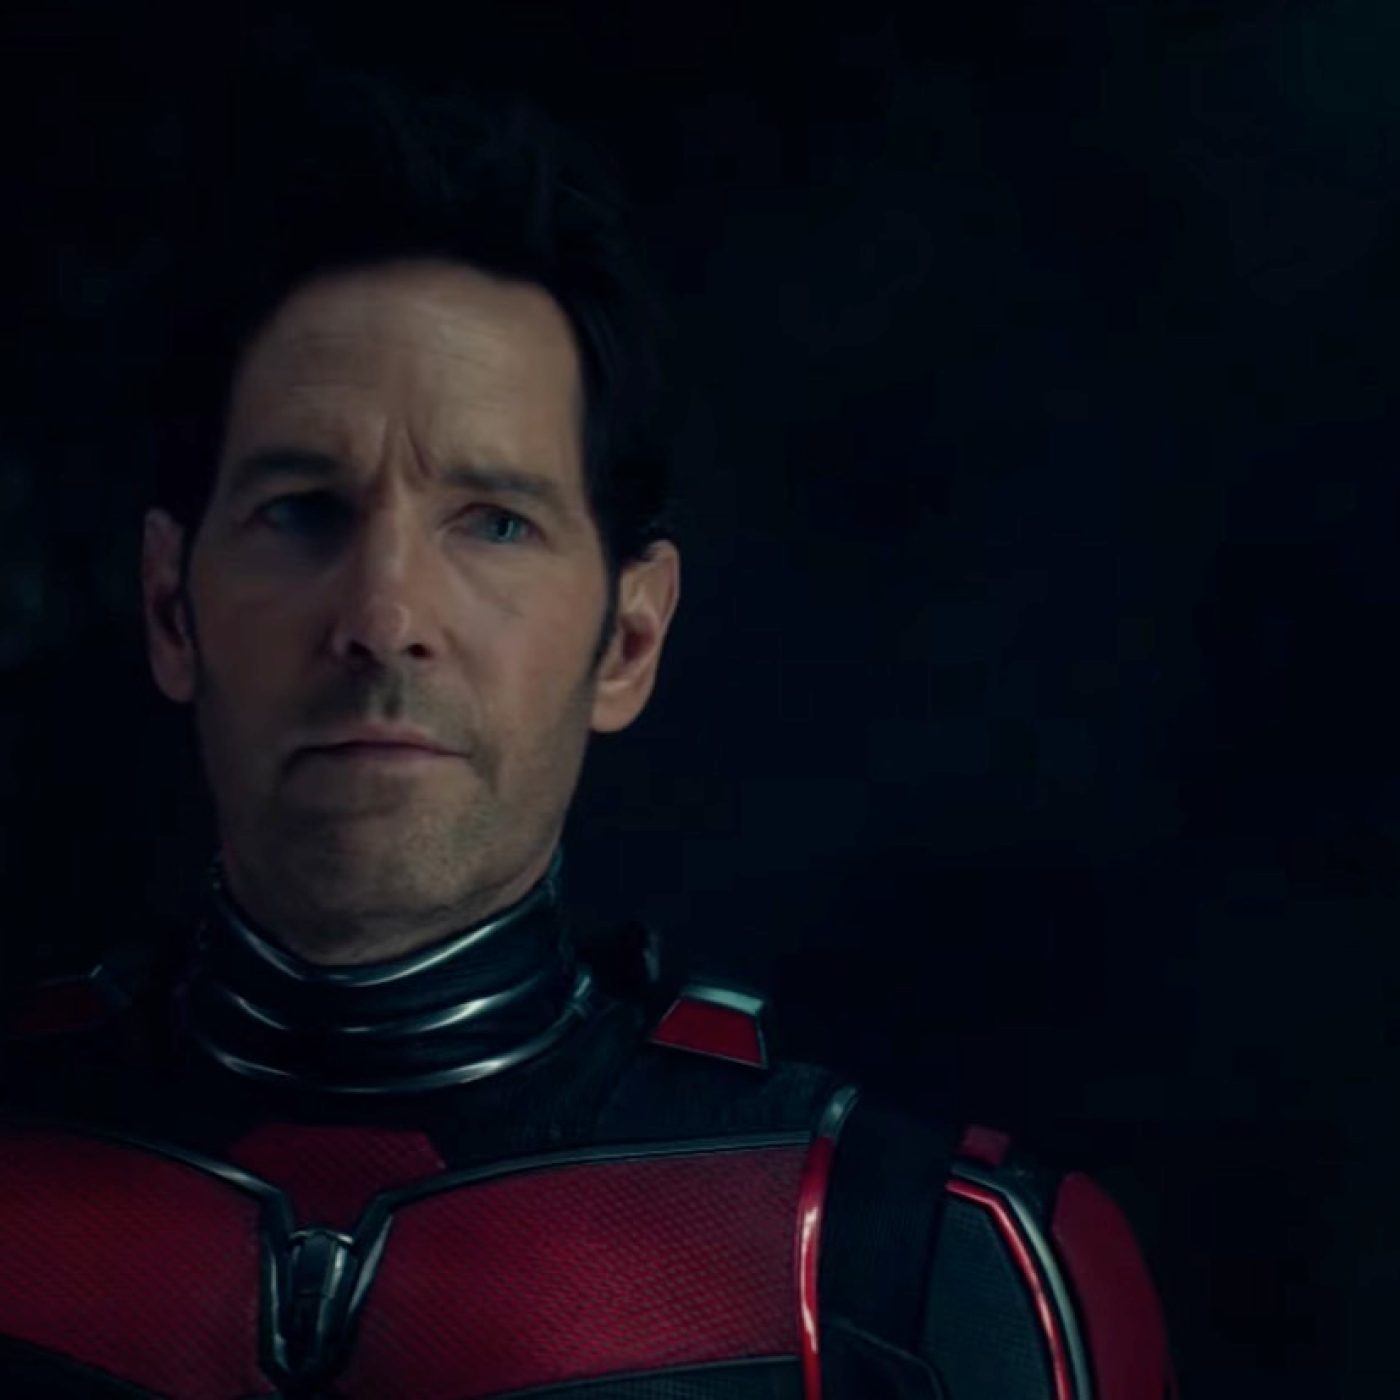 Ant-Man and The Wasp: Quantumania (Movie, 2023), Cast, Characters,  Credits, Release Date